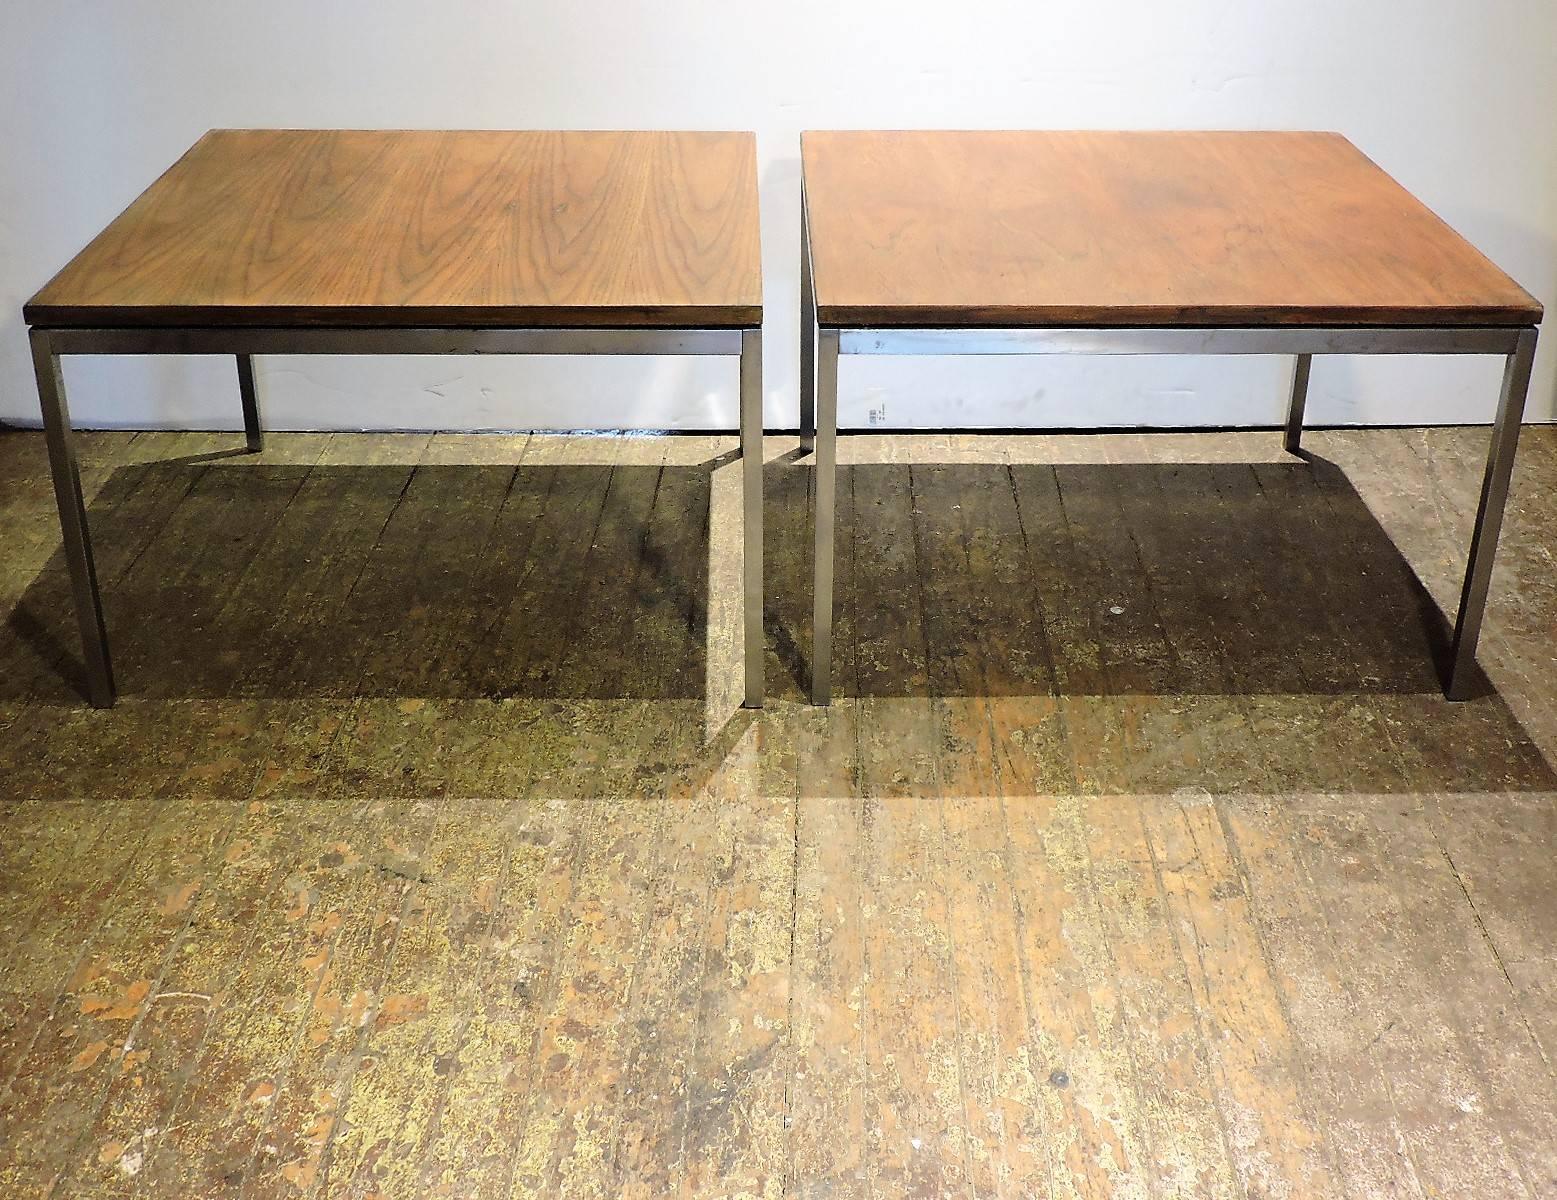 Early Florence Knoll Steel Tables with Floating Walnut Tops 1